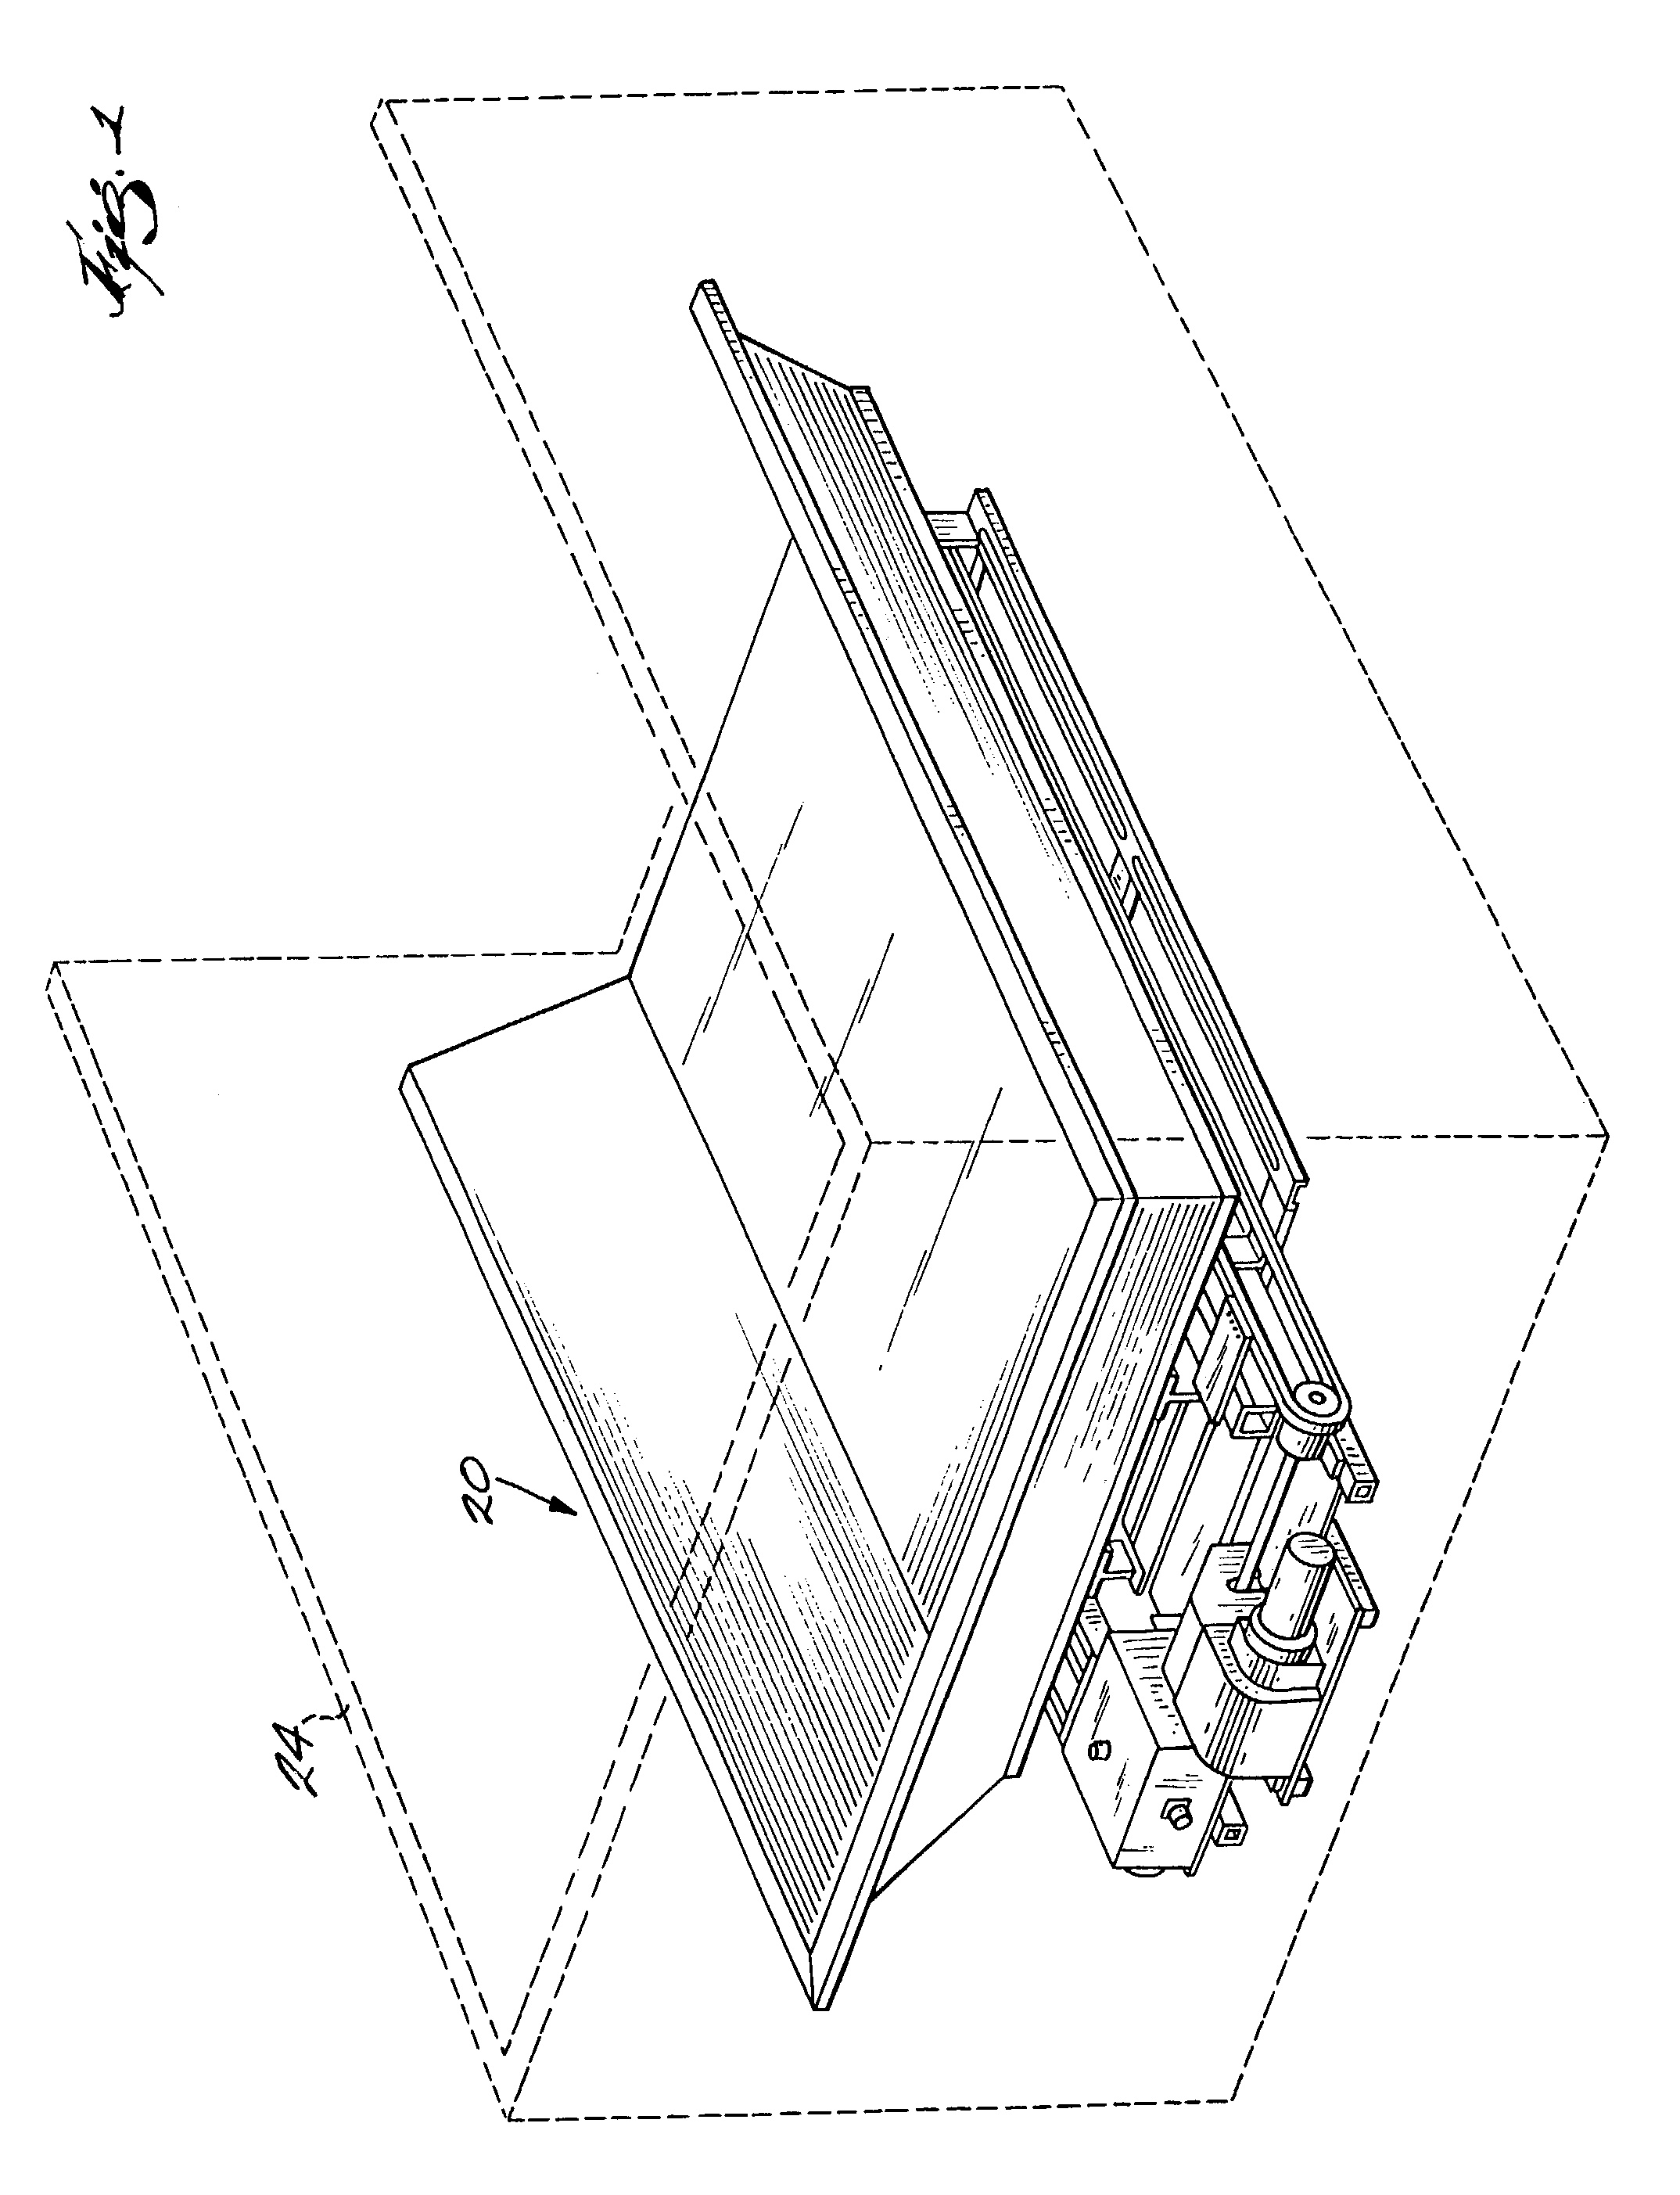 Dumping and transporting accessory having a telescoping lift with a pivot mounted trolley